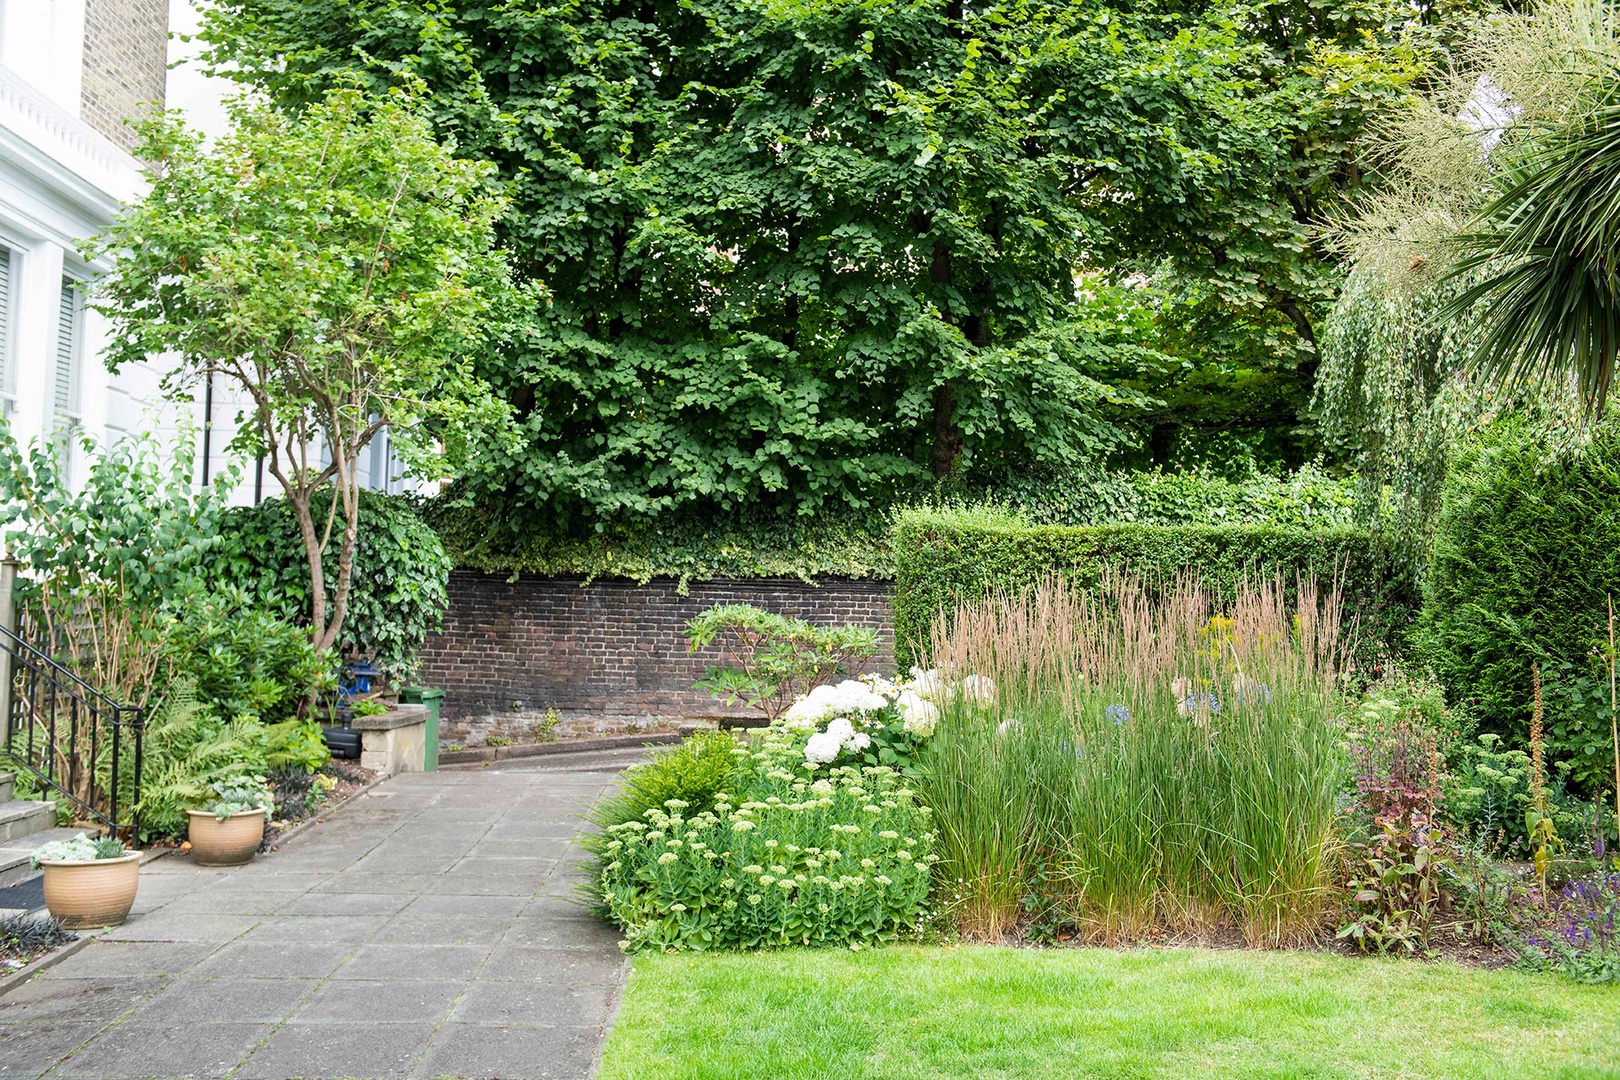 Enjoy direct access to the garden from Phillimore.